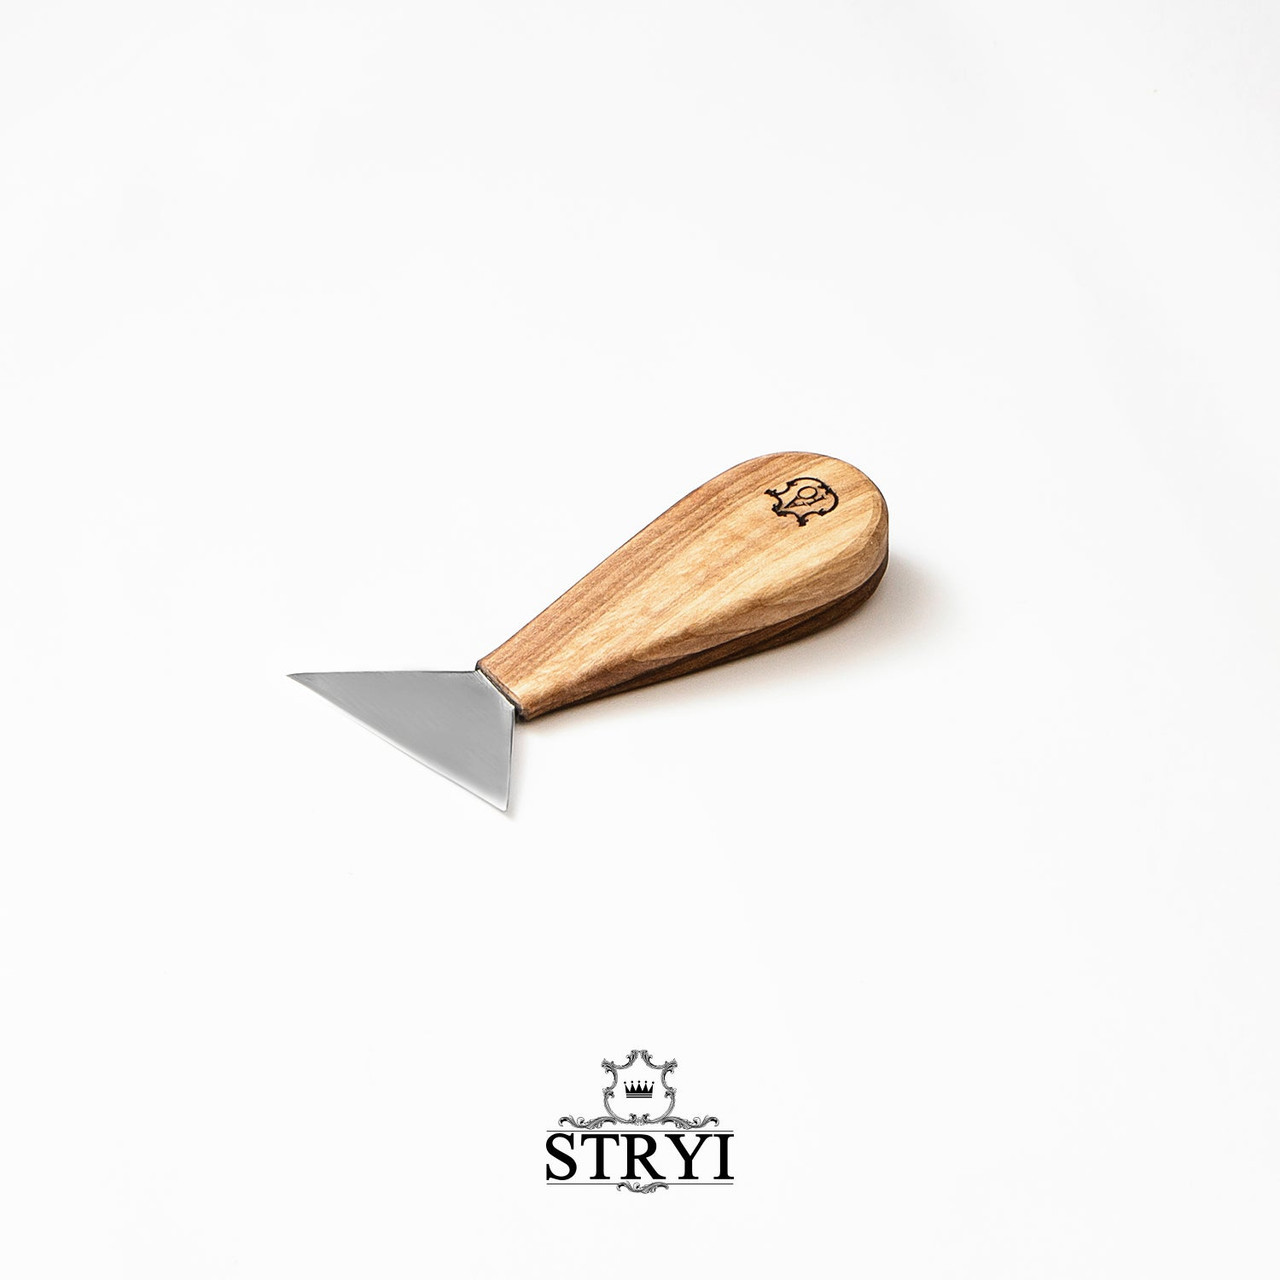 A side profile of the Stryi Yurev Geometric Knife 70mm with a wide blade and a small wooden handle with the manufacturer logo.